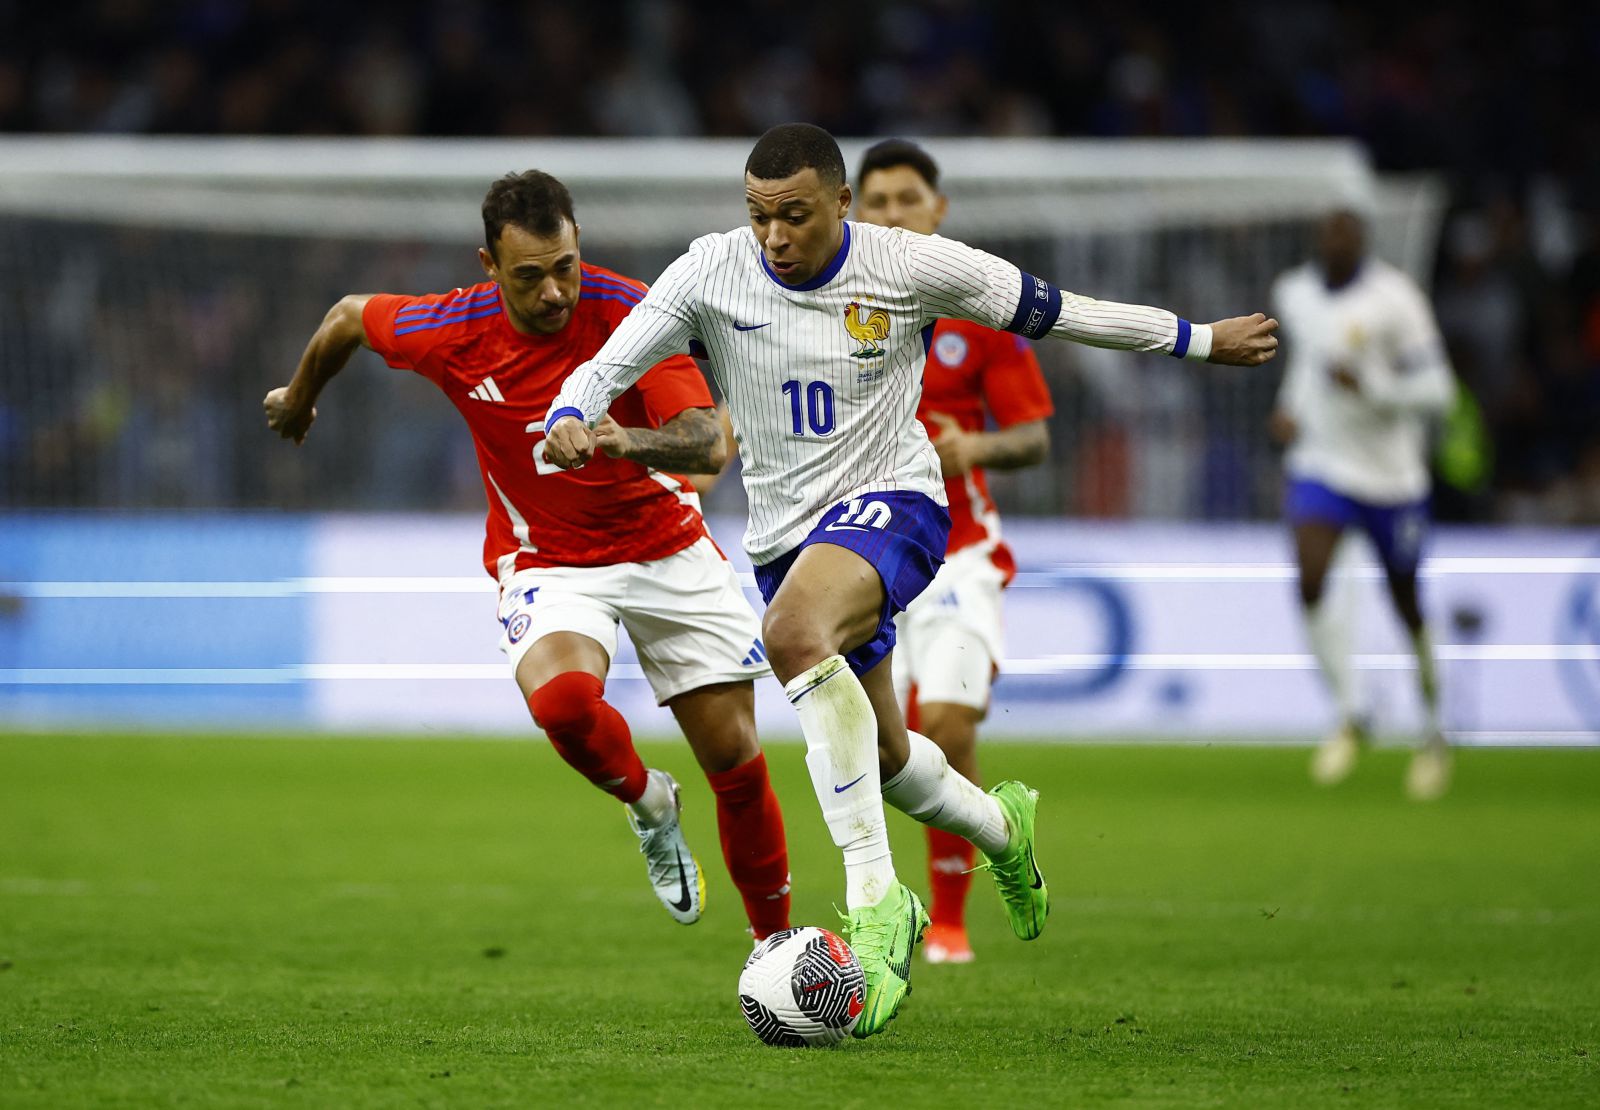 Watch Video France 3-2 Chile 2024.03.26 All Goals Highlights, Giao Hữu Friendly Match, Friendly Match, Video highlights France 3-2 Chile, See live result France 3-2 Chile, Clip France 3-2 Chile highlights, Xem giao hữu Pháp 3-2 Chile, Xem highlights giao hữu Pháp 3-2 Chile, France Full Goals Highlight, Chile Full Goals Highlight